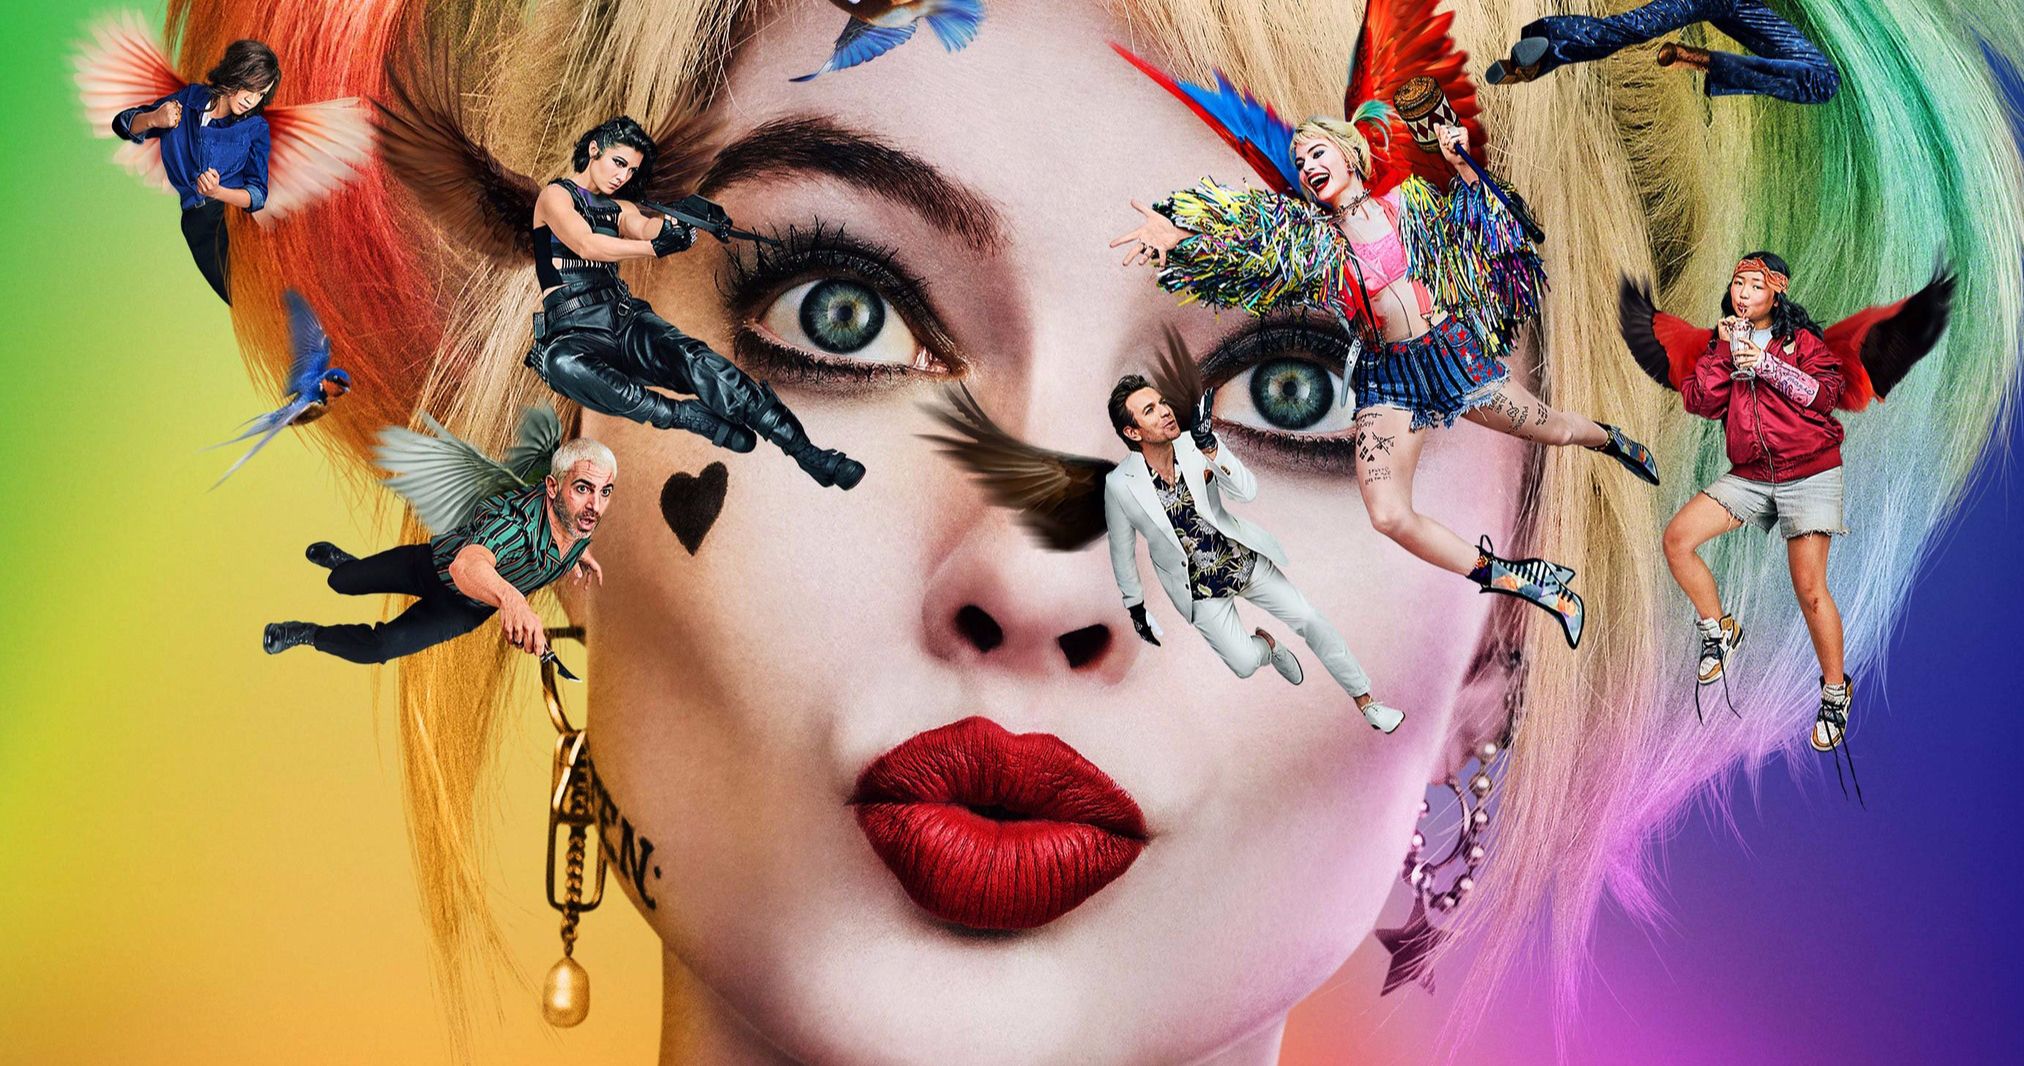 New Birds of Prey Title Gets Mocked on Twitter as Warner Bros. Explains Why It Changed